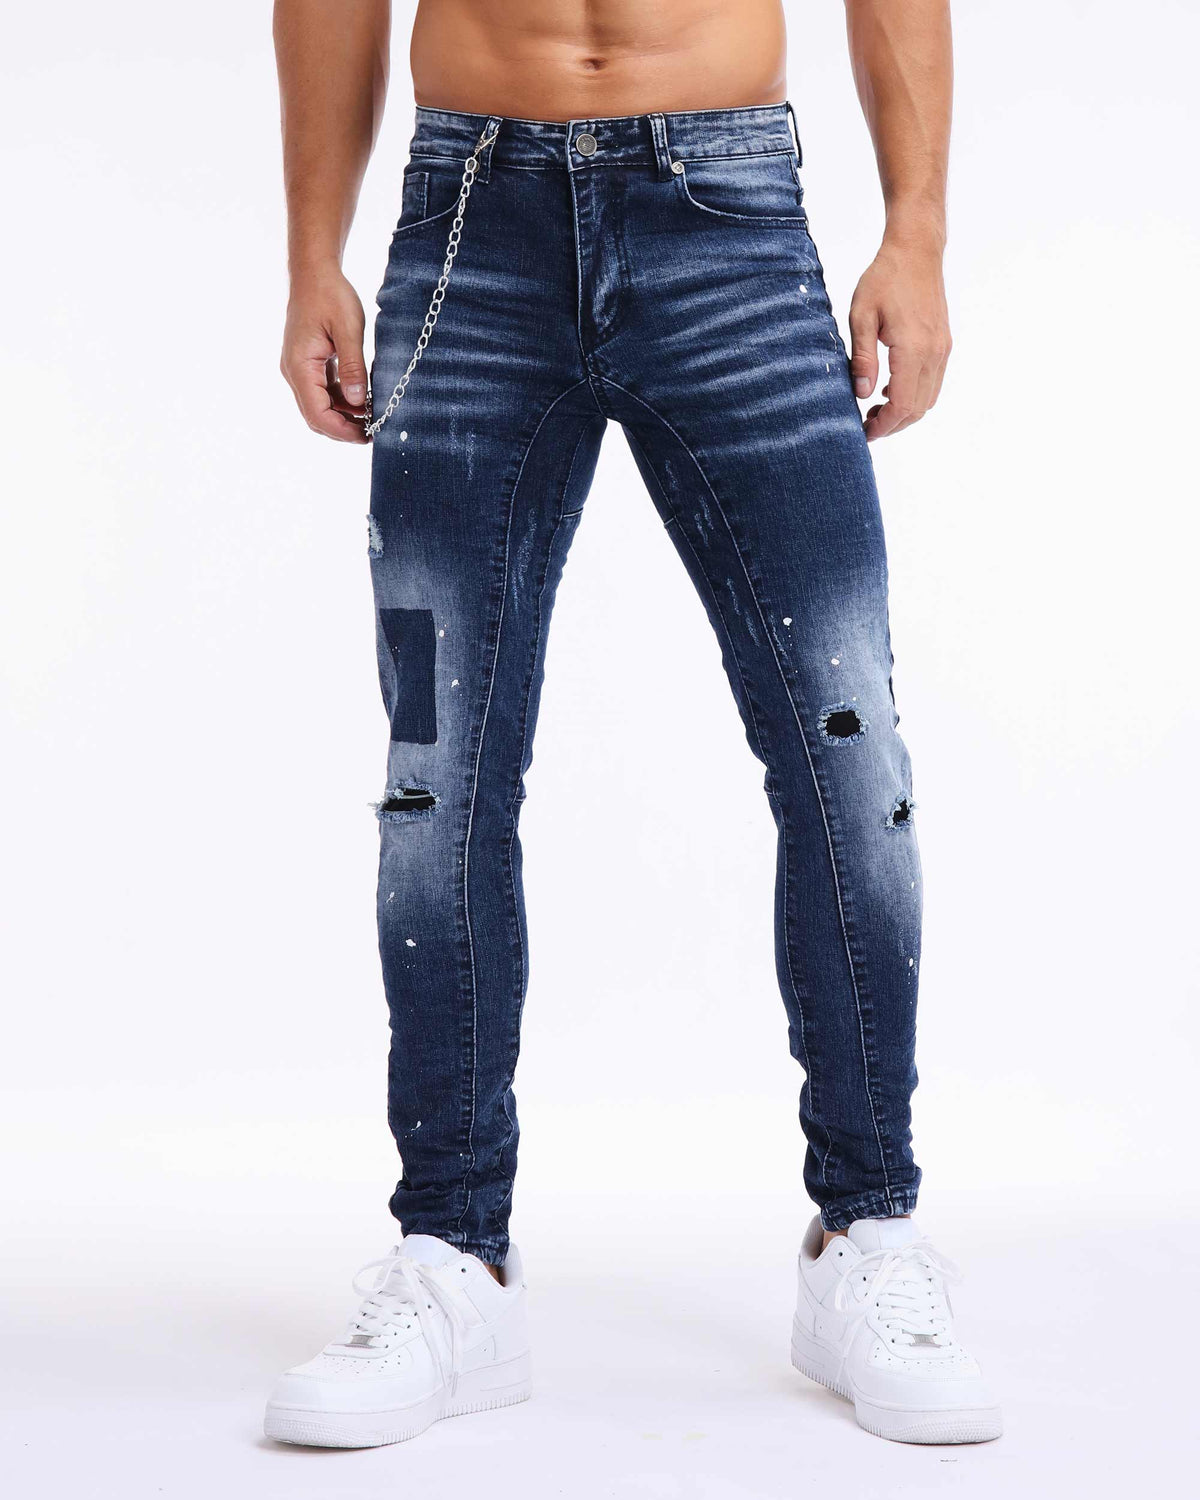 LOGEQI Spray Paint Rectangular Patch Ripped Blue Jeans